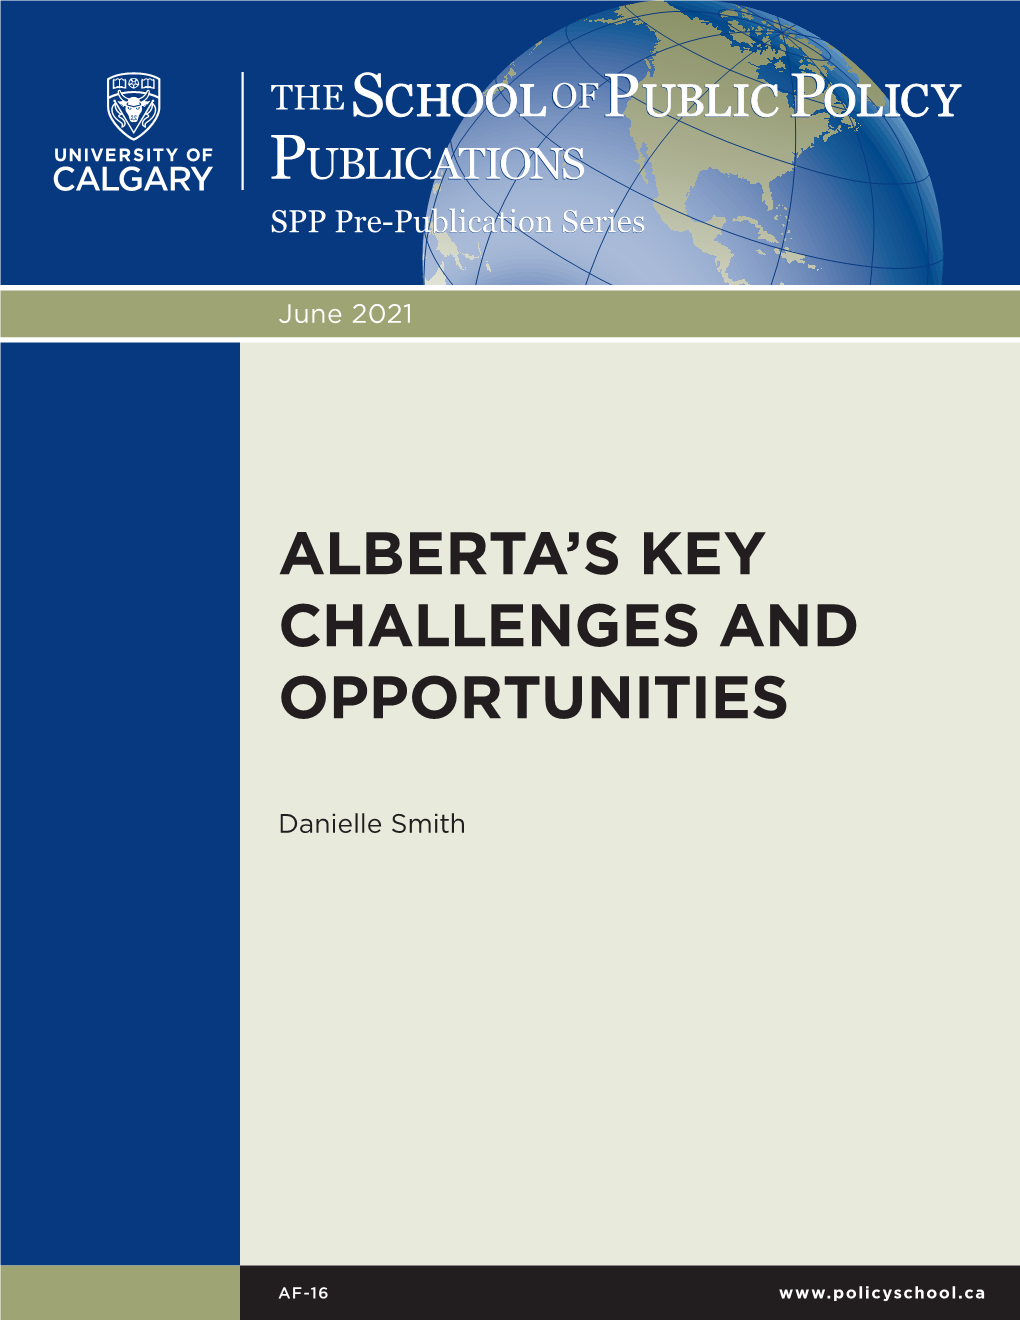 Alberta's Key Challenges and Opportunities